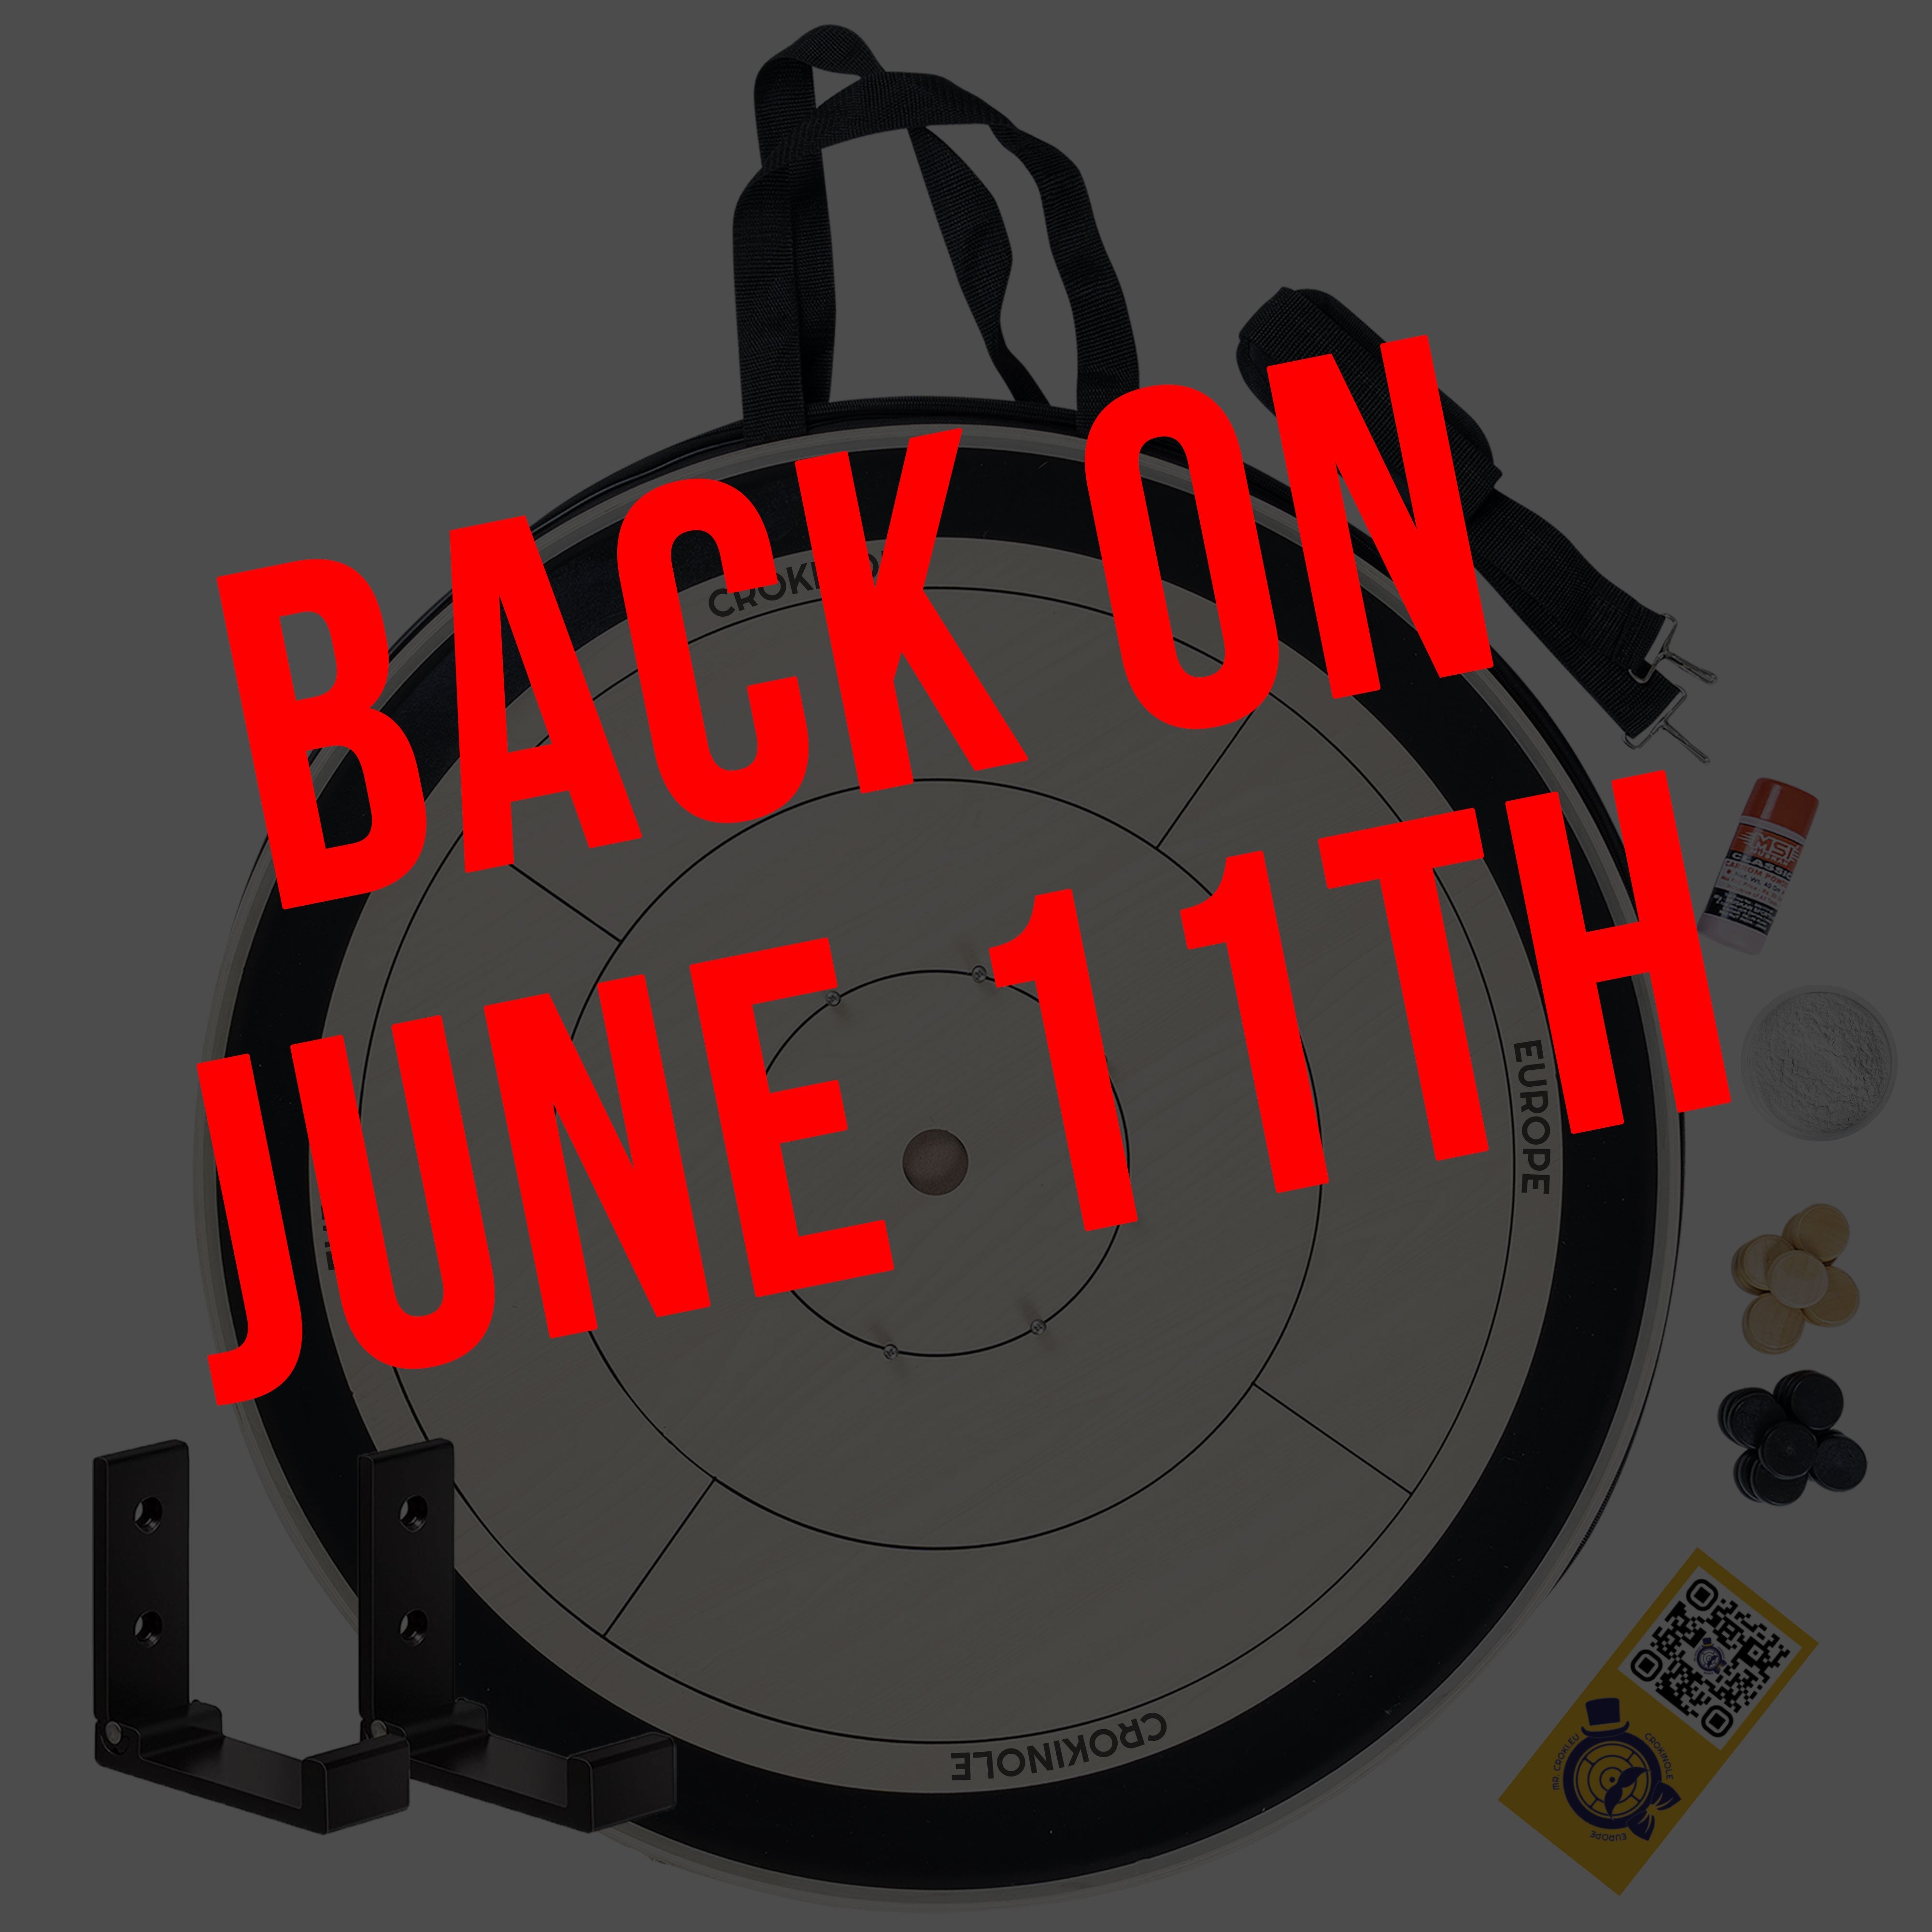 PRE SALE > 11 JUNE > Crokinole Board Game - Wood Tournament Board, 26 Discs, Carrom Powder, Carrying Bag - Official Dimensions - Strategic Game for Young and Old - Buy Crokinole